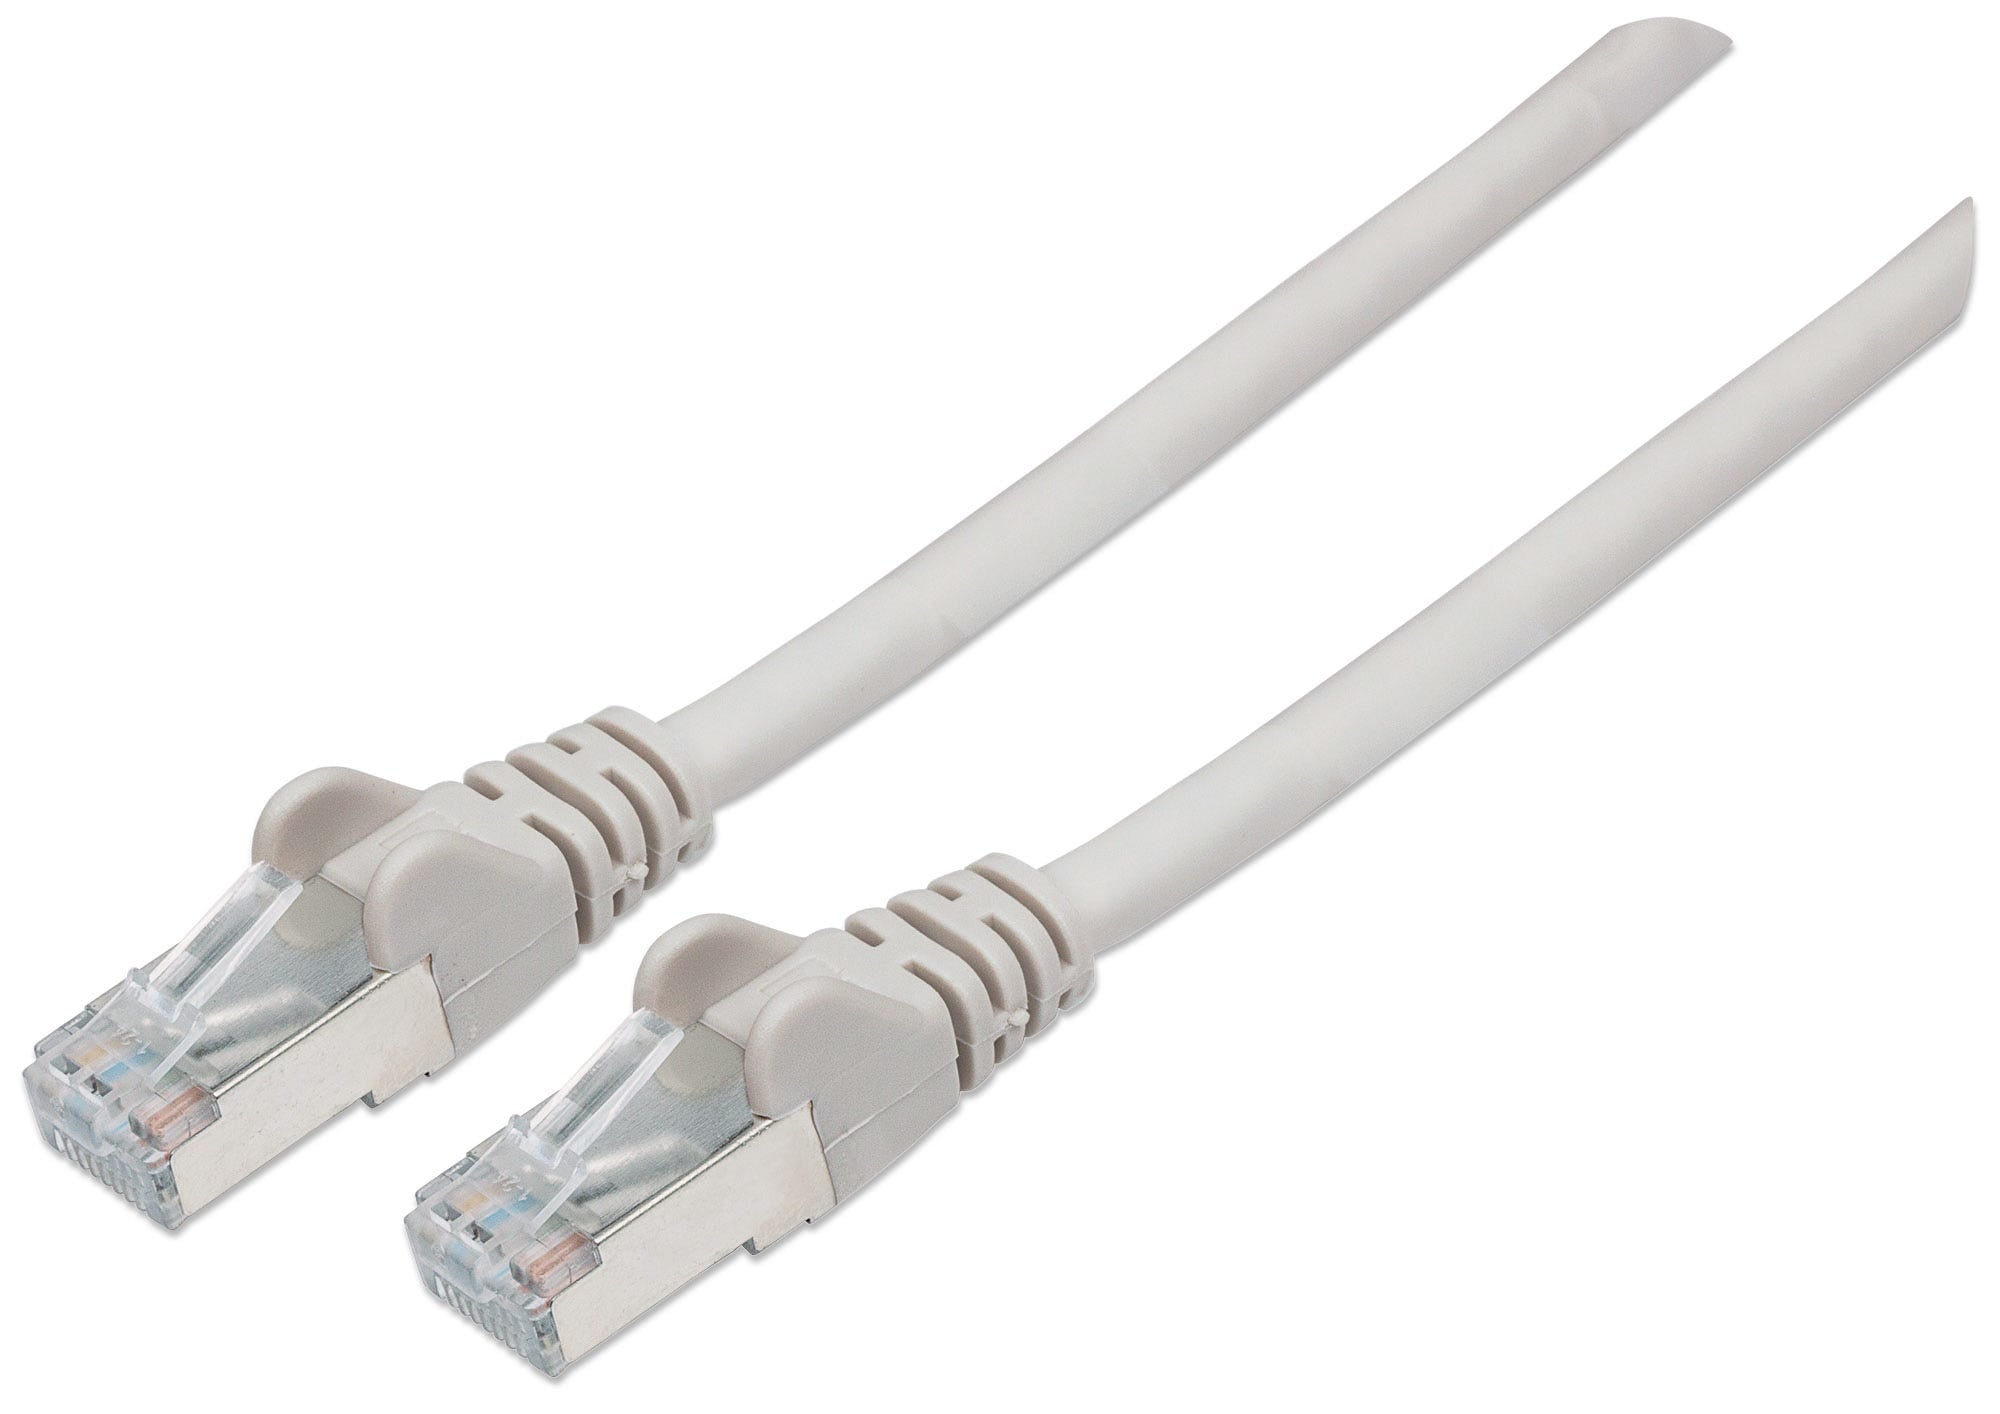 Intellinet Network Patch Cable, Cat6, 30m, Grey, Copper, S/FTP, LSOH / LSZH, PVC, RJ45, Gold Plated Contacts, Snagless, Booted, Lifetime Warranty, Polybag